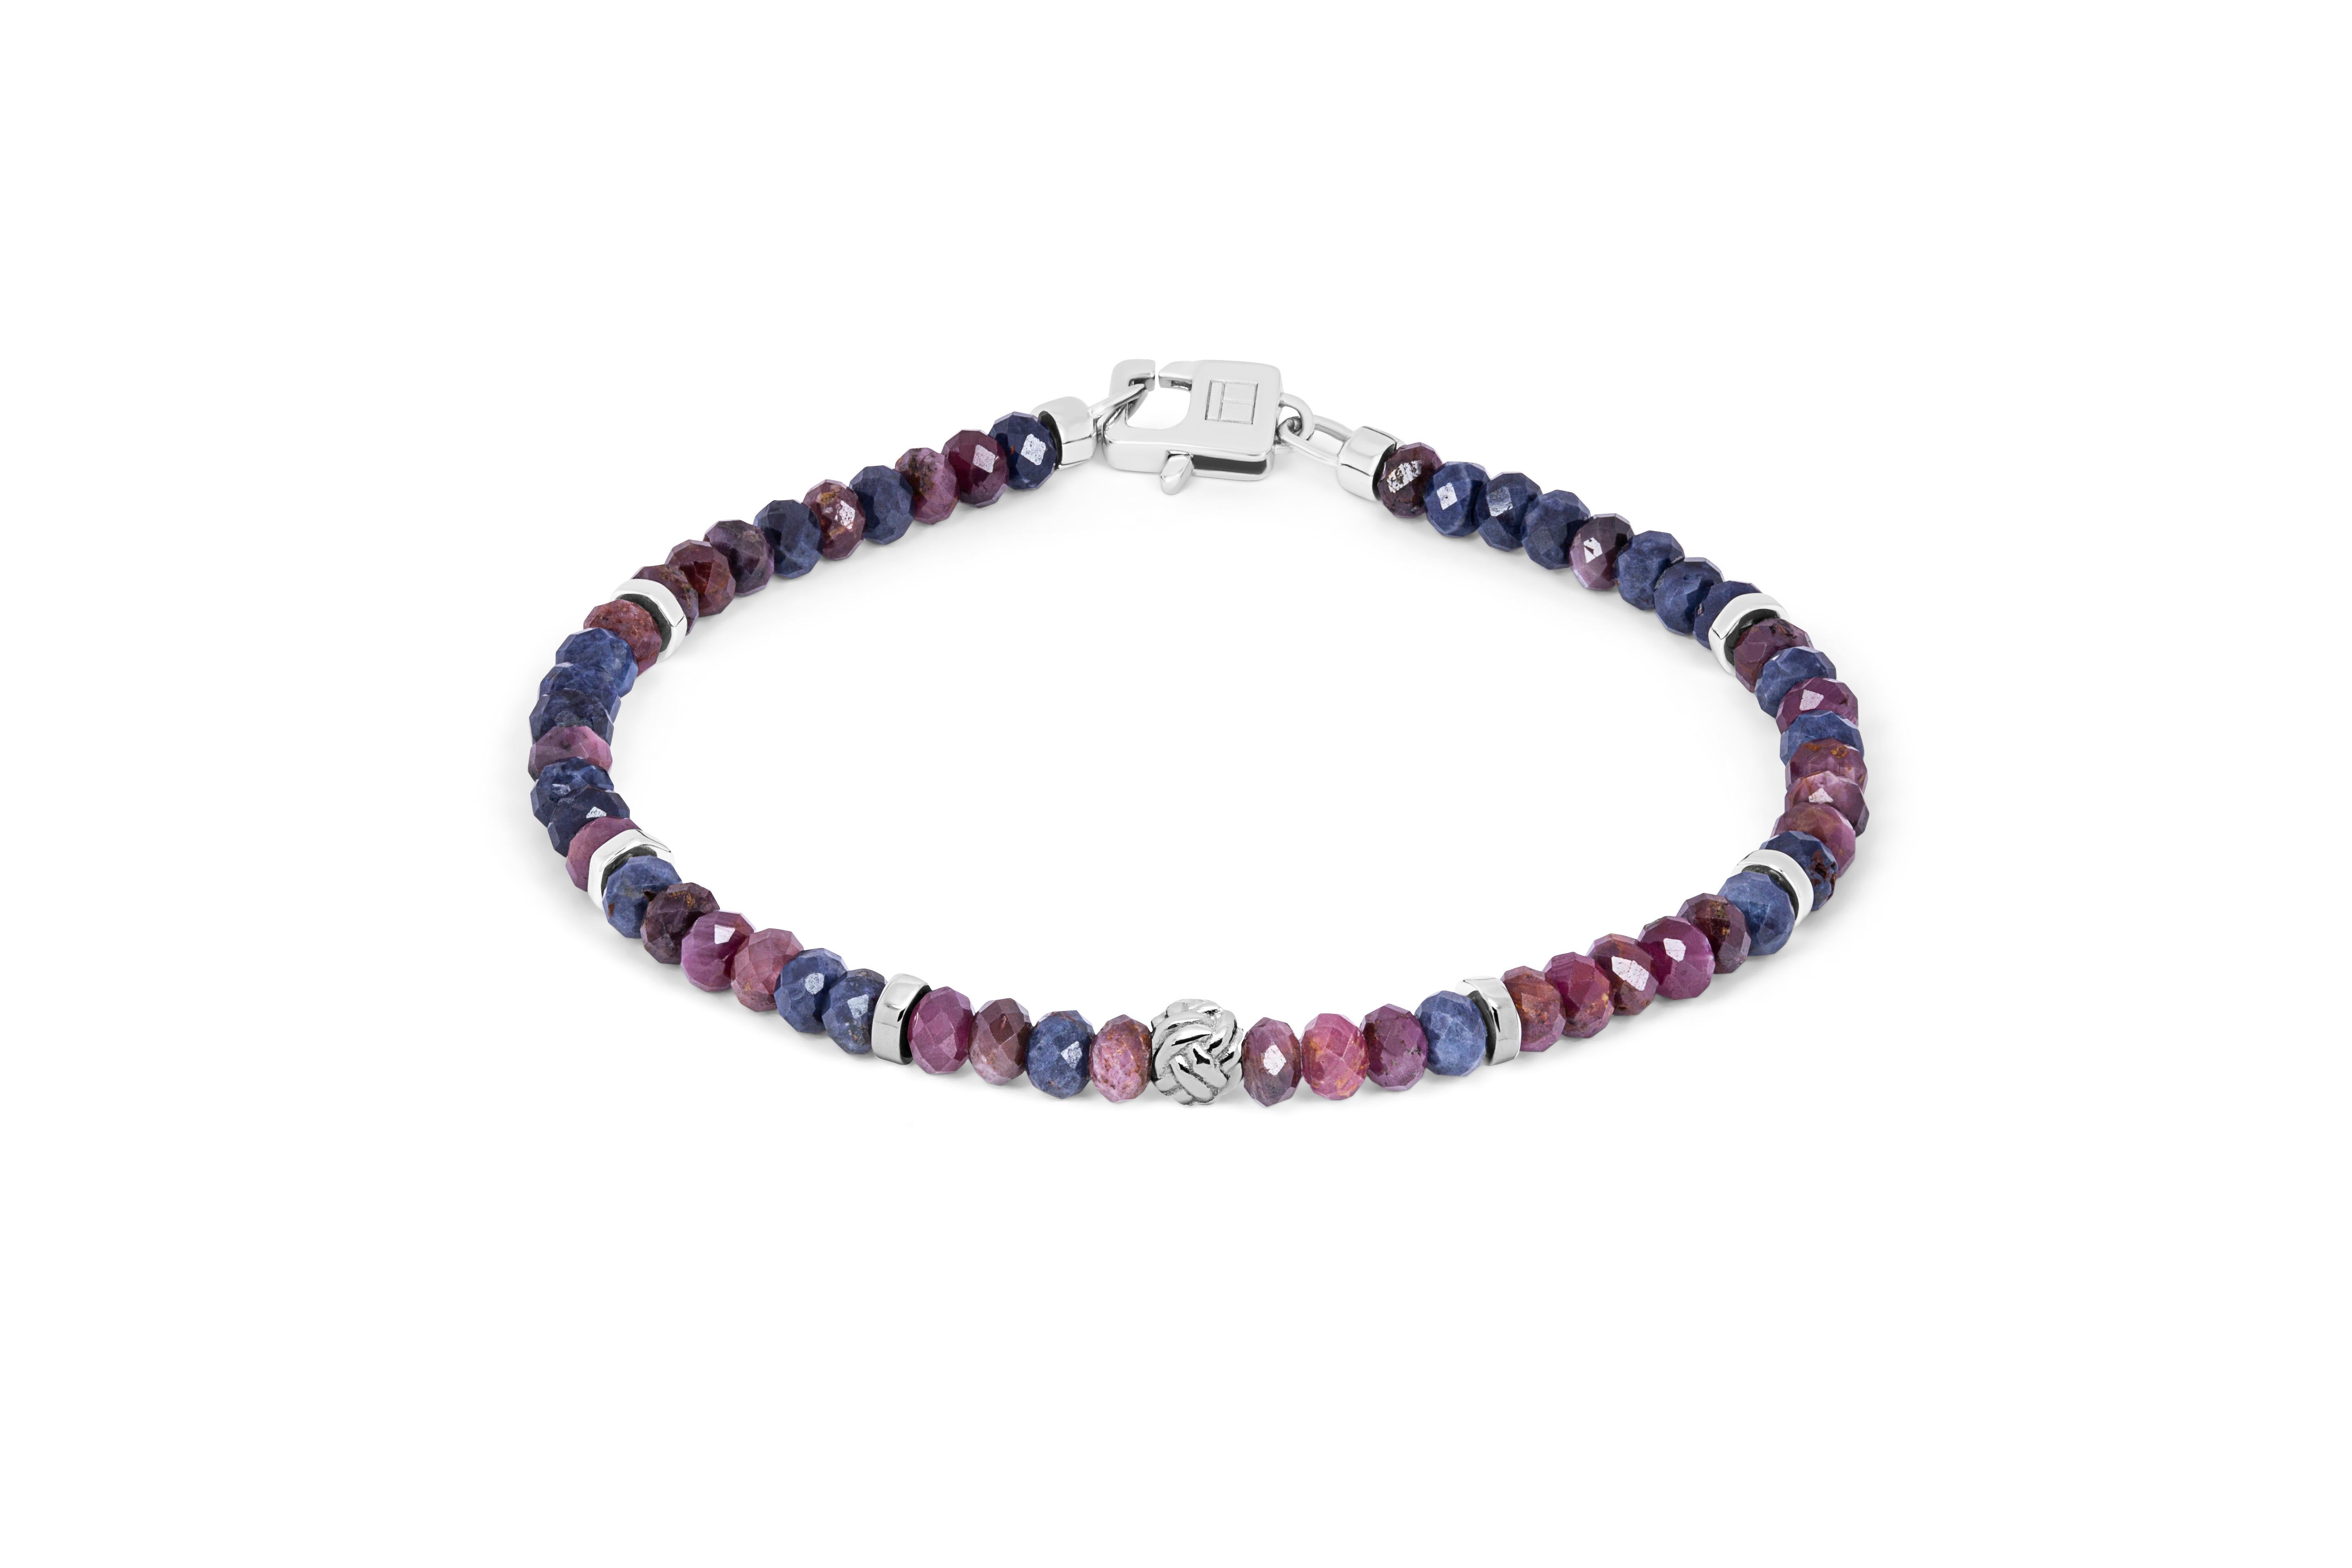 Nodo Bracelet with Red and Blue Sapphires and Sterling Silver, Size L

Faceted blue and red sapphire beads sit together with accents of rhodium-plated sterling silver discs and finished with our lobster clasp. A hand-crafted unisex piece, with each